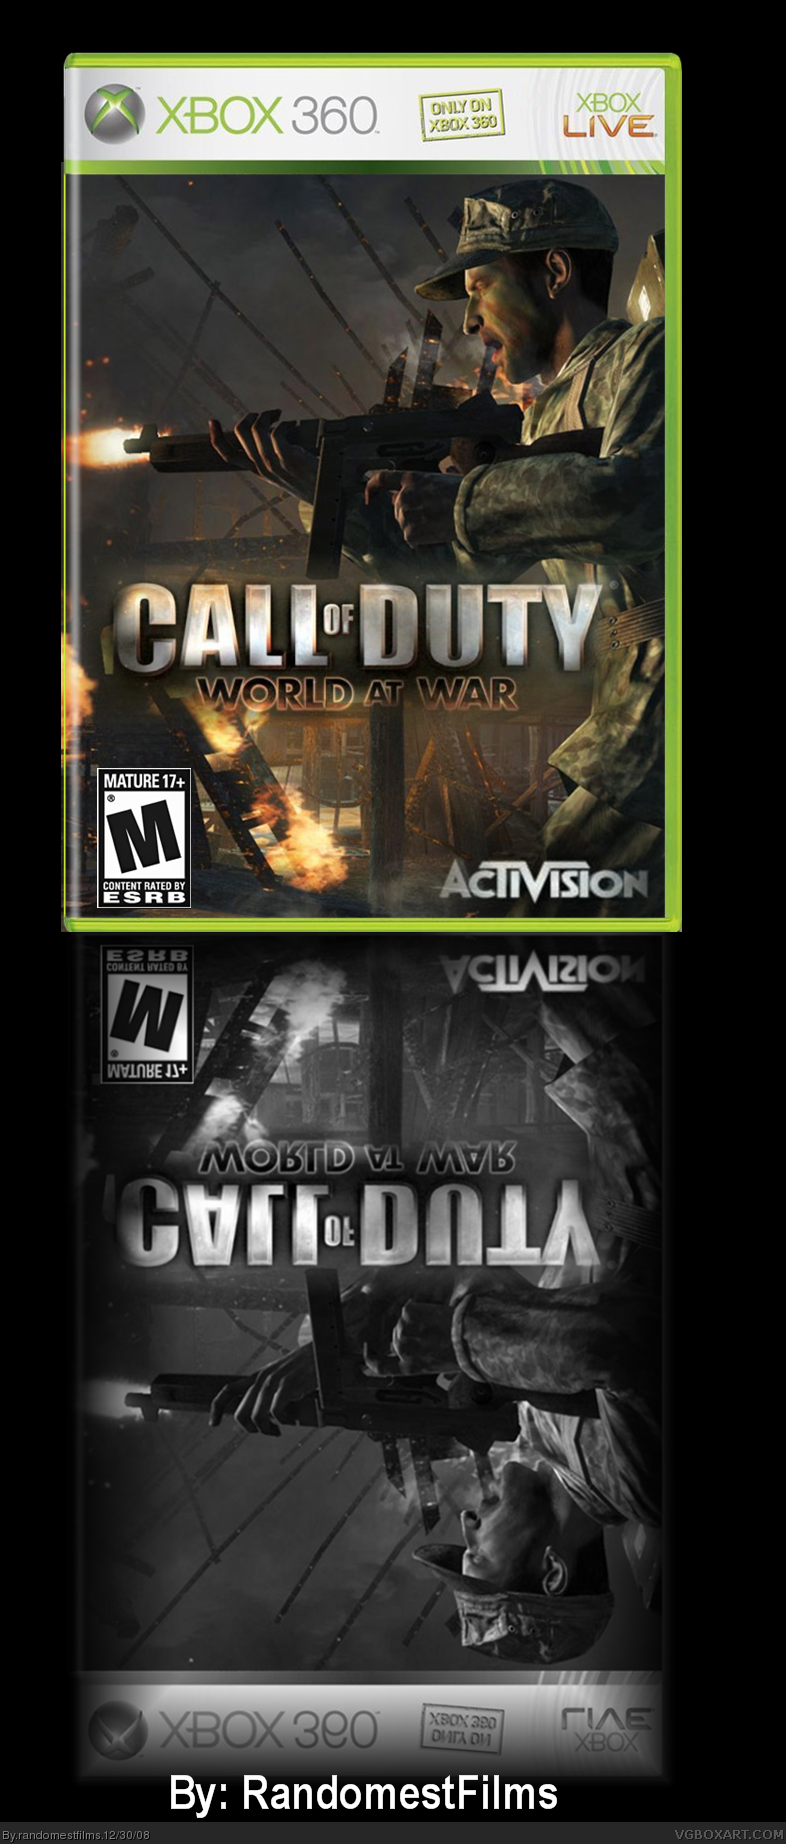 Call of Duty 5 box cover